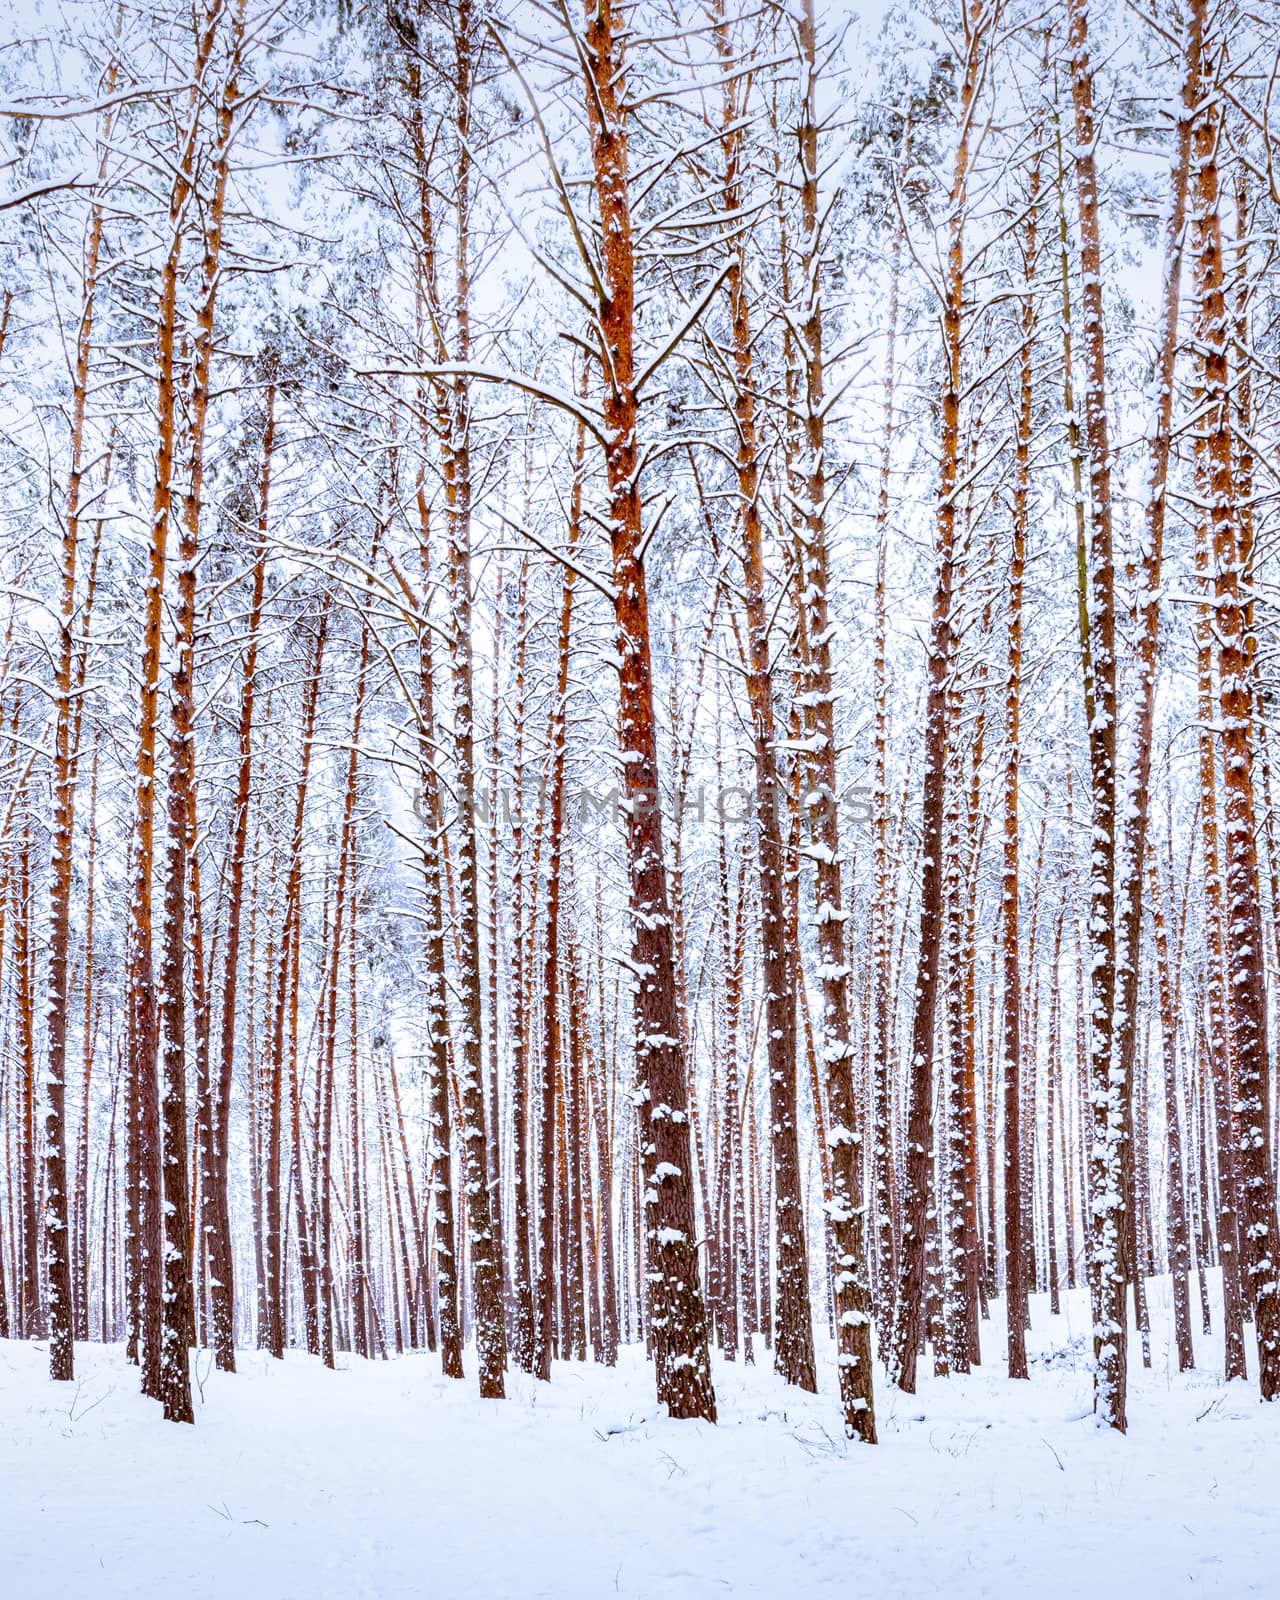 Snowfall in a pine forest on a winter cloudy day. Pine trunks covered with stuck snow.